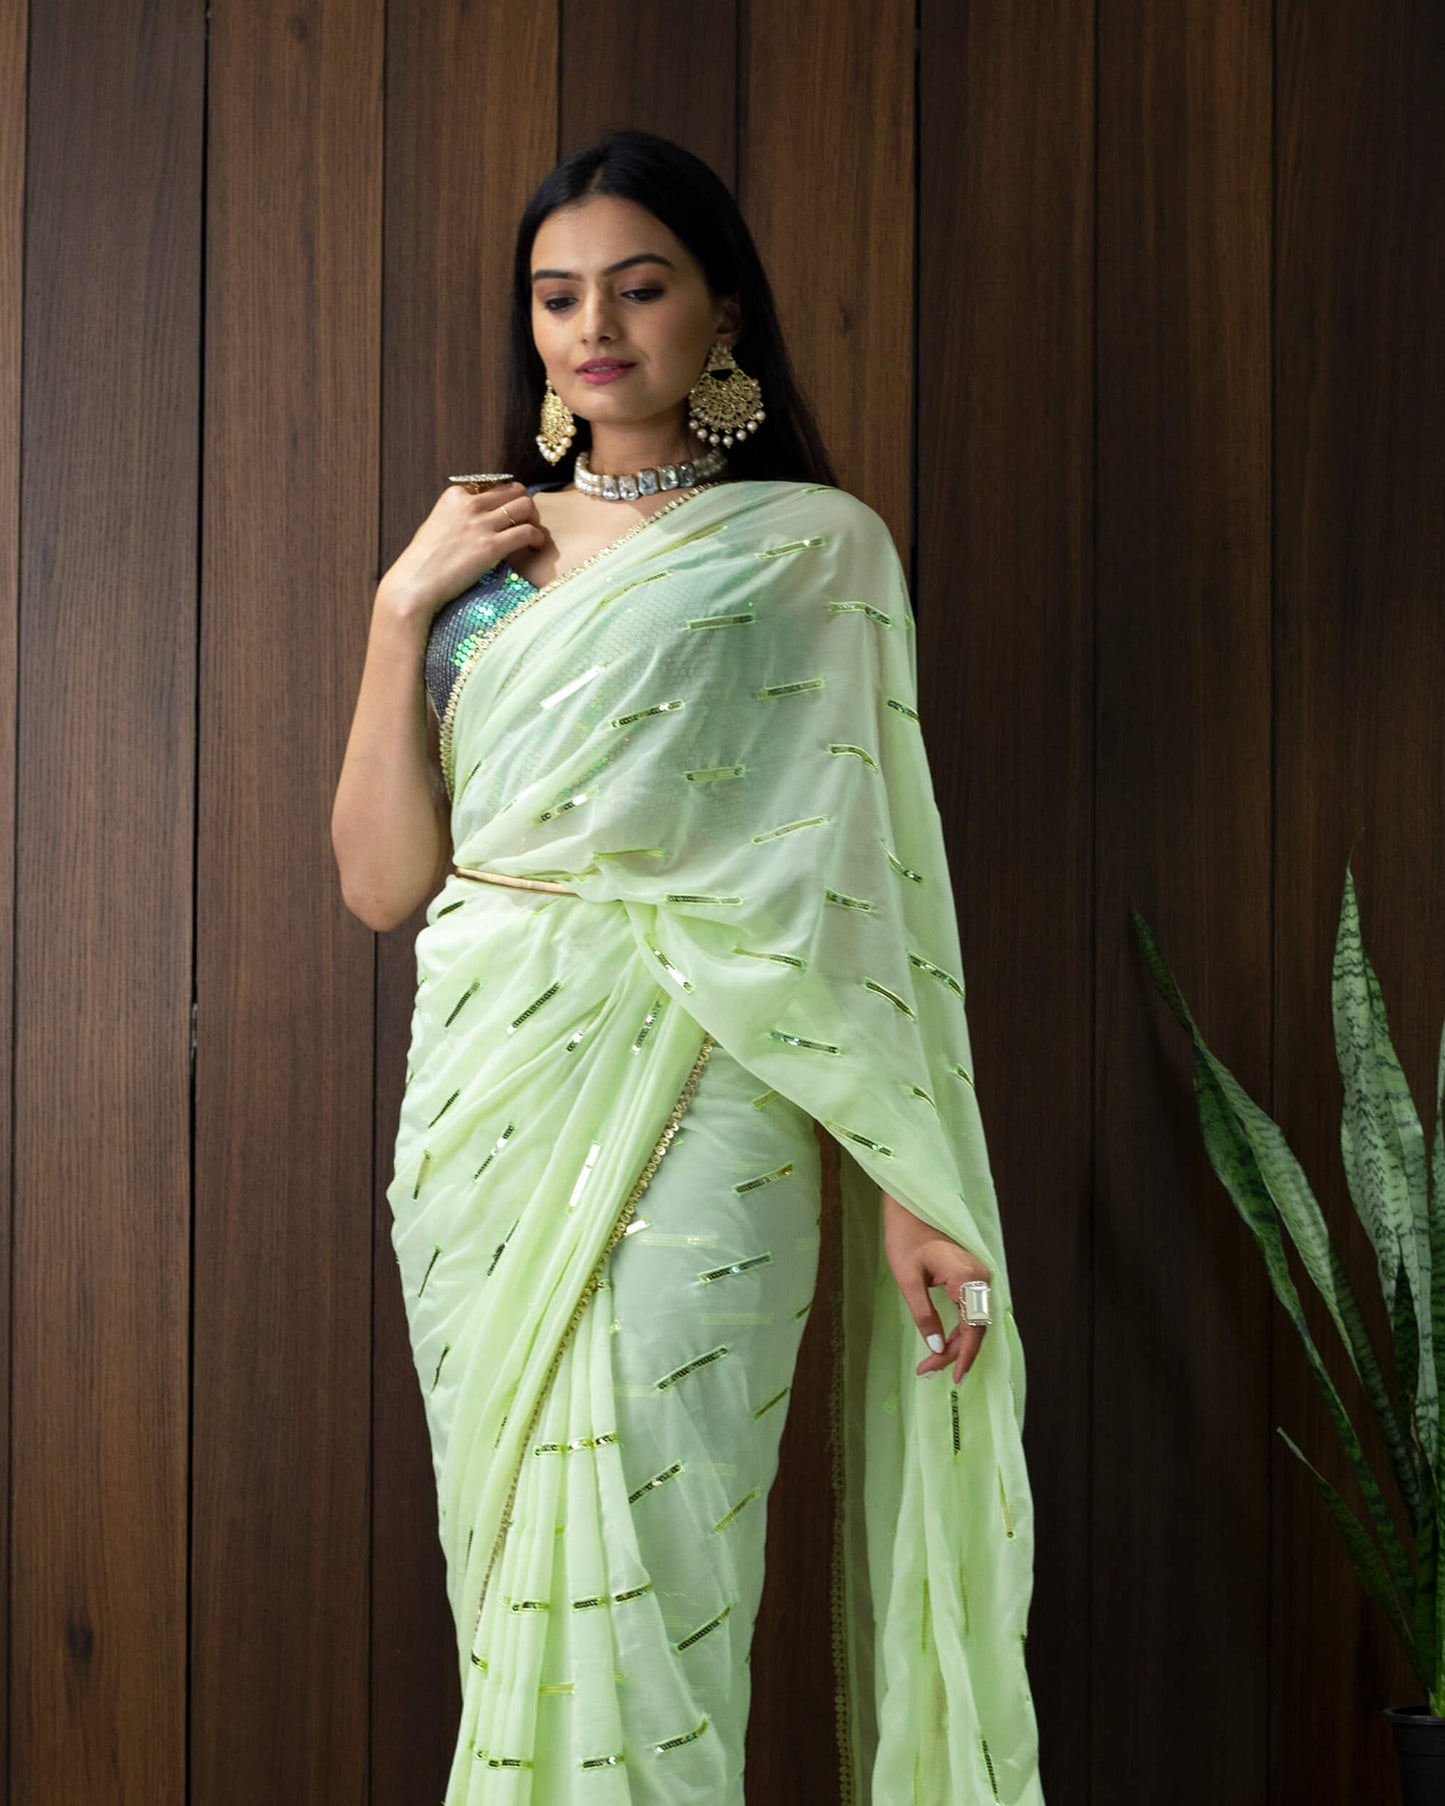 Tea Green Stripes Patten Sequins Embroidery Georgette Pre-Draped Saree With Tubular Beads Sequins Lace